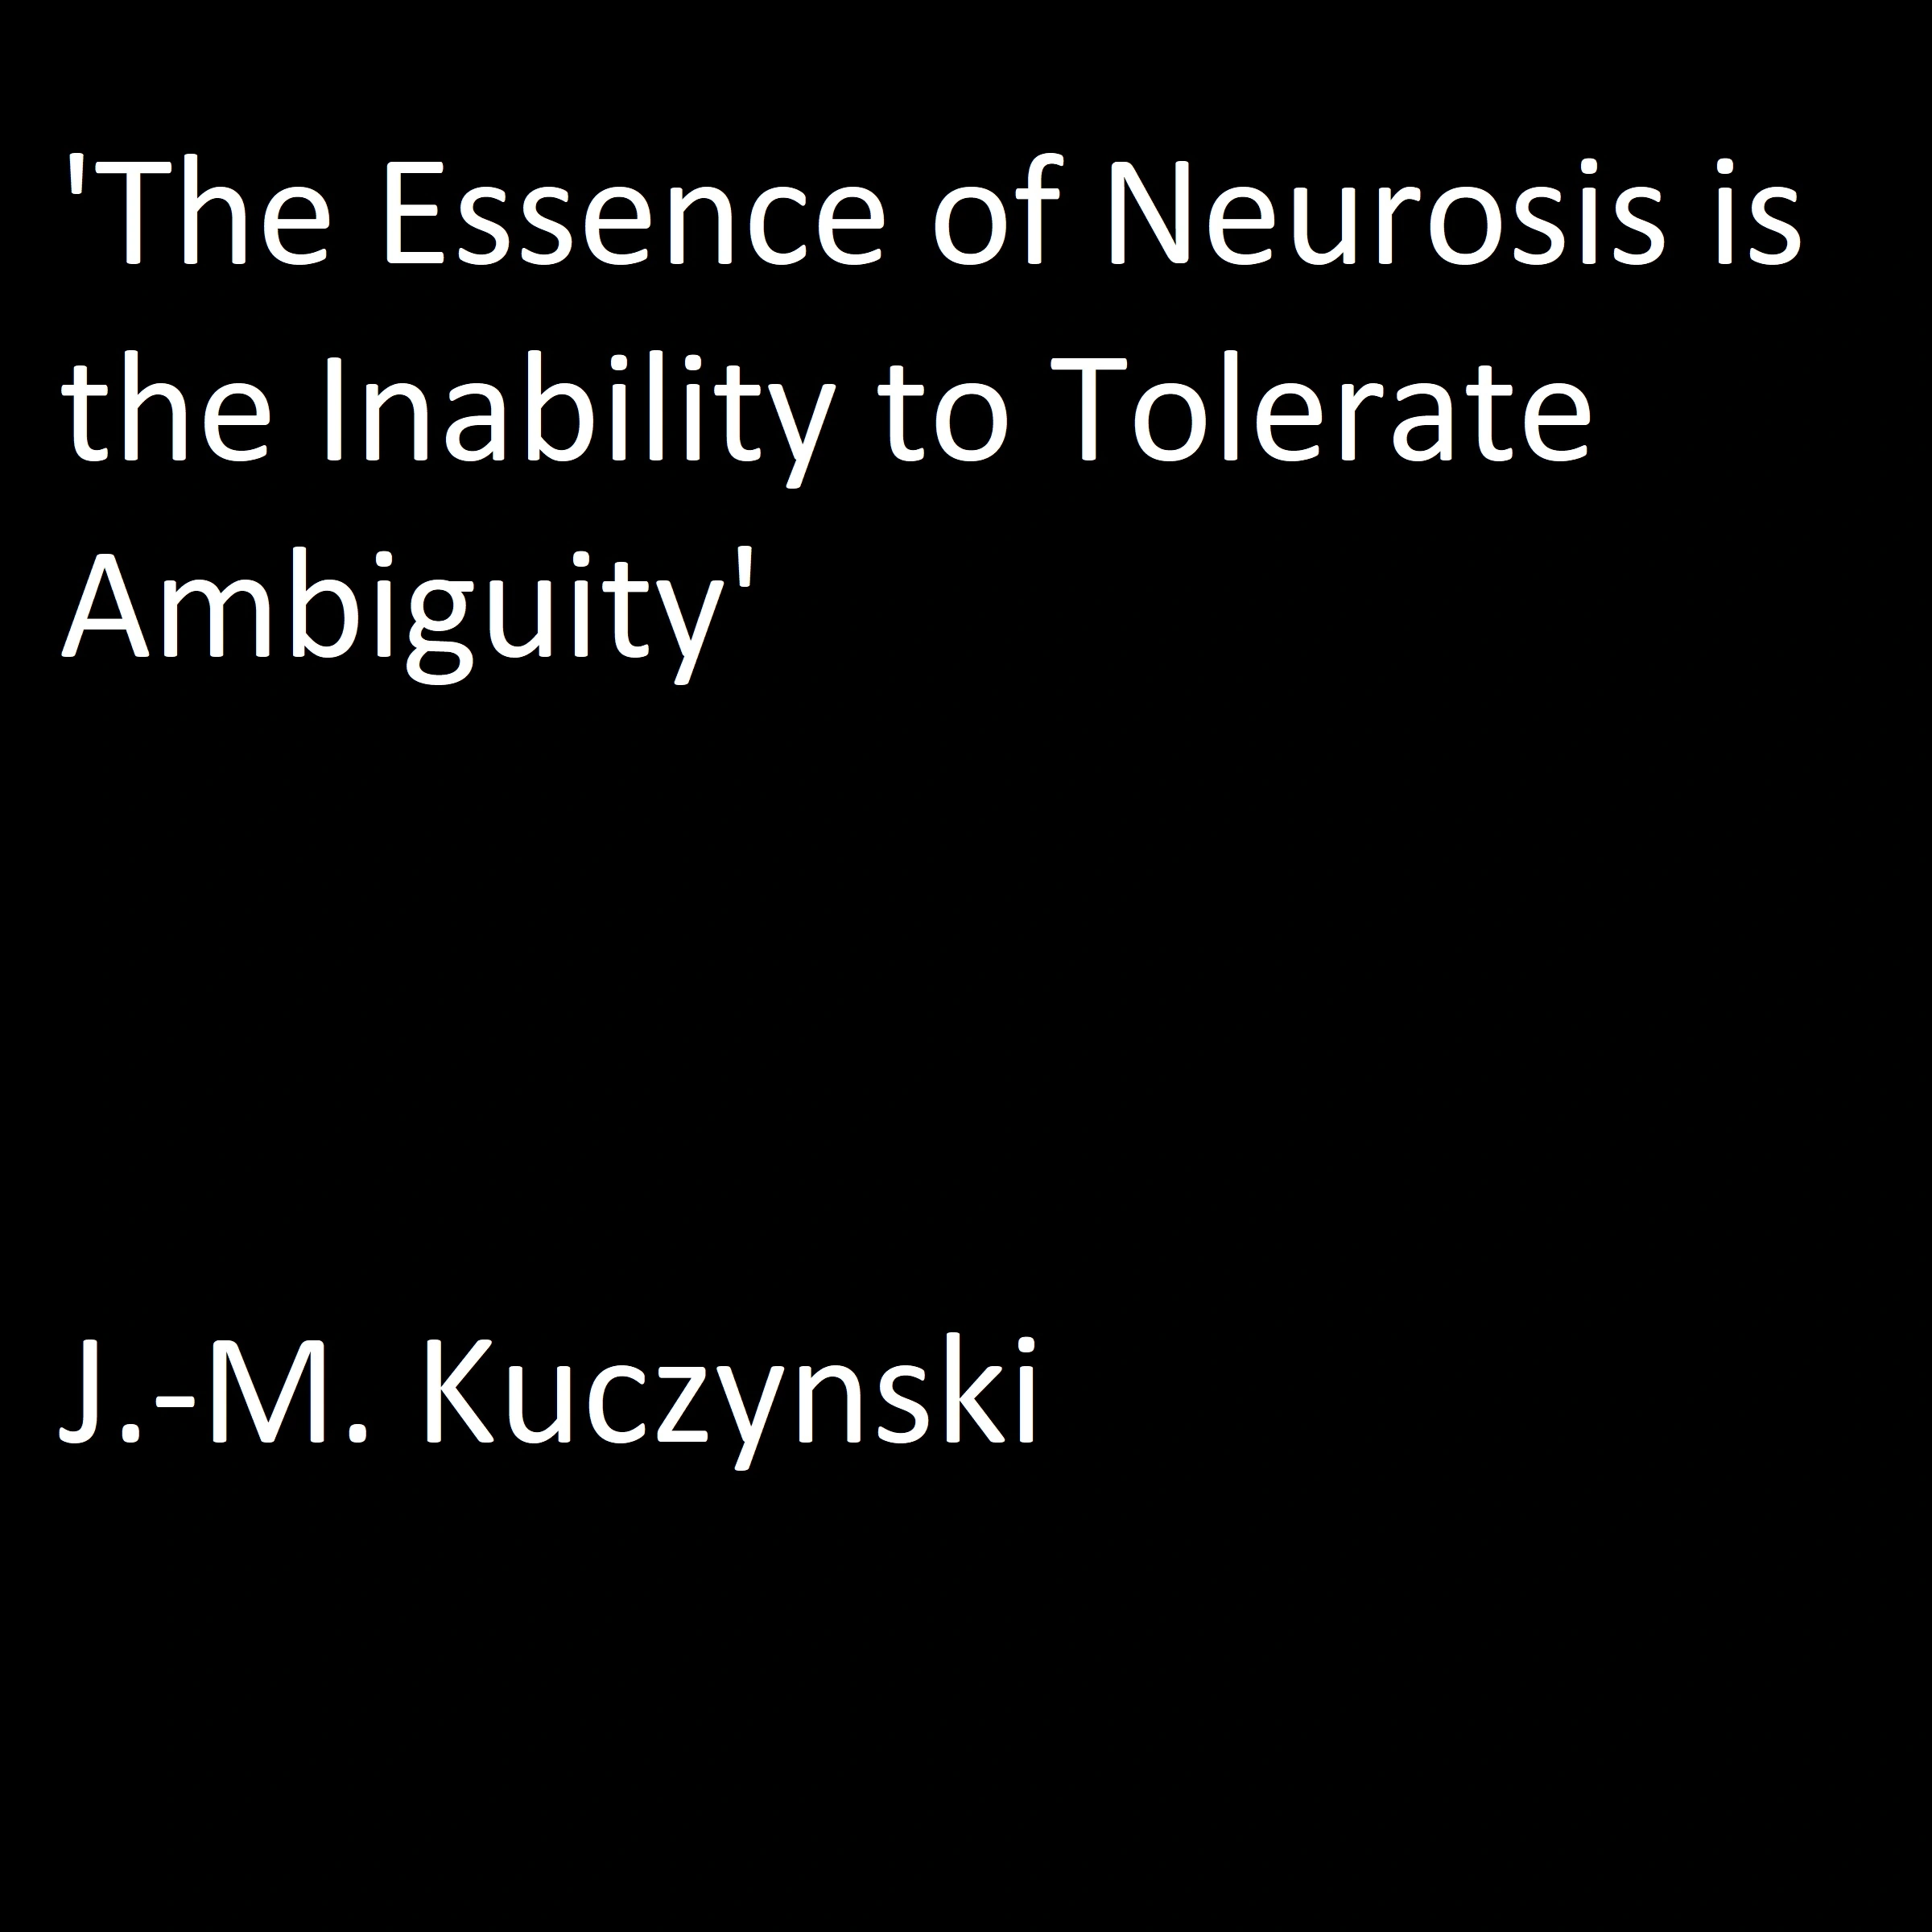 ‘The Essence of Neurosis is the Inability to Tolerate Ambiguity’ Audiobook by J.-M. Kuczynski